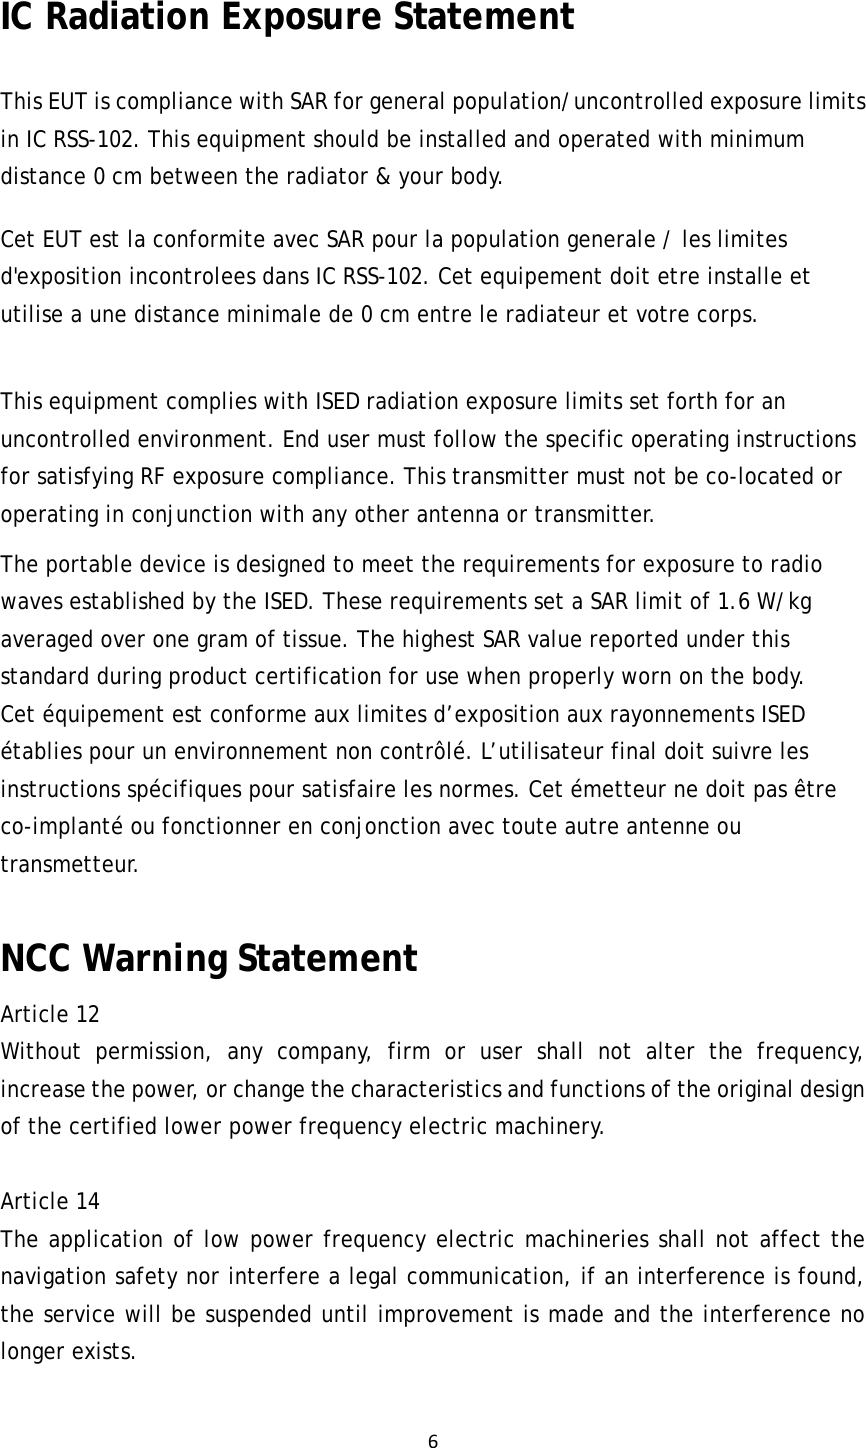 6IC Radiation Exposure Statement This EUT is compliance with SAR for general population/uncontrolled exposure limits in IC RSS-102. This equipment should be installed and operated with minimum distance 0 cm between the radiator &amp; your body.   Cet EUT est la conformite avec SAR pour la population generale / les limites d&apos;exposition incontrolees dans IC RSS-102. Cet equipement doit etre installe et utilise a une distance minimale de 0 cm entre le radiateur et votre corps.  This equipment complies with ISED radiation exposure limits set forth for an uncontrolled environment. End user must follow the specific operating instructions for satisfying RF exposure compliance. This transmitter must not be co-located or operating in conjunction with any other antenna or transmitter. The portable device is designed to meet the requirements for exposure to radio waves established by the ISED. These requirements set a SAR limit of 1.6 W/kg averaged over one gram of tissue. The highest SAR value reported under this standard during product certification for use when properly worn on the body. Cet équipement est conforme aux limites d’exposition aux rayonnements ISED établies pour un environnement non contrôlé. L’utilisateur final doit suivre les instructions spécifiques pour satisfaire les normes. Cet émetteur ne doit pas être co-implanté ou fonctionner en conjonction avec toute autre antenne ou transmetteur. NCC Warning StatementArticle 12  Without permission, any company, firm or user shall not alter the frequency, increase the power, or change the characteristics and functions of the original design of the certified lower power frequency electric machinery.   Article 14  The application of low power frequency electric machineries shall not affect the navigation safety nor interfere a legal communication, if an interference is found, the service will be suspended until improvement is made and the interference no longer exists.  